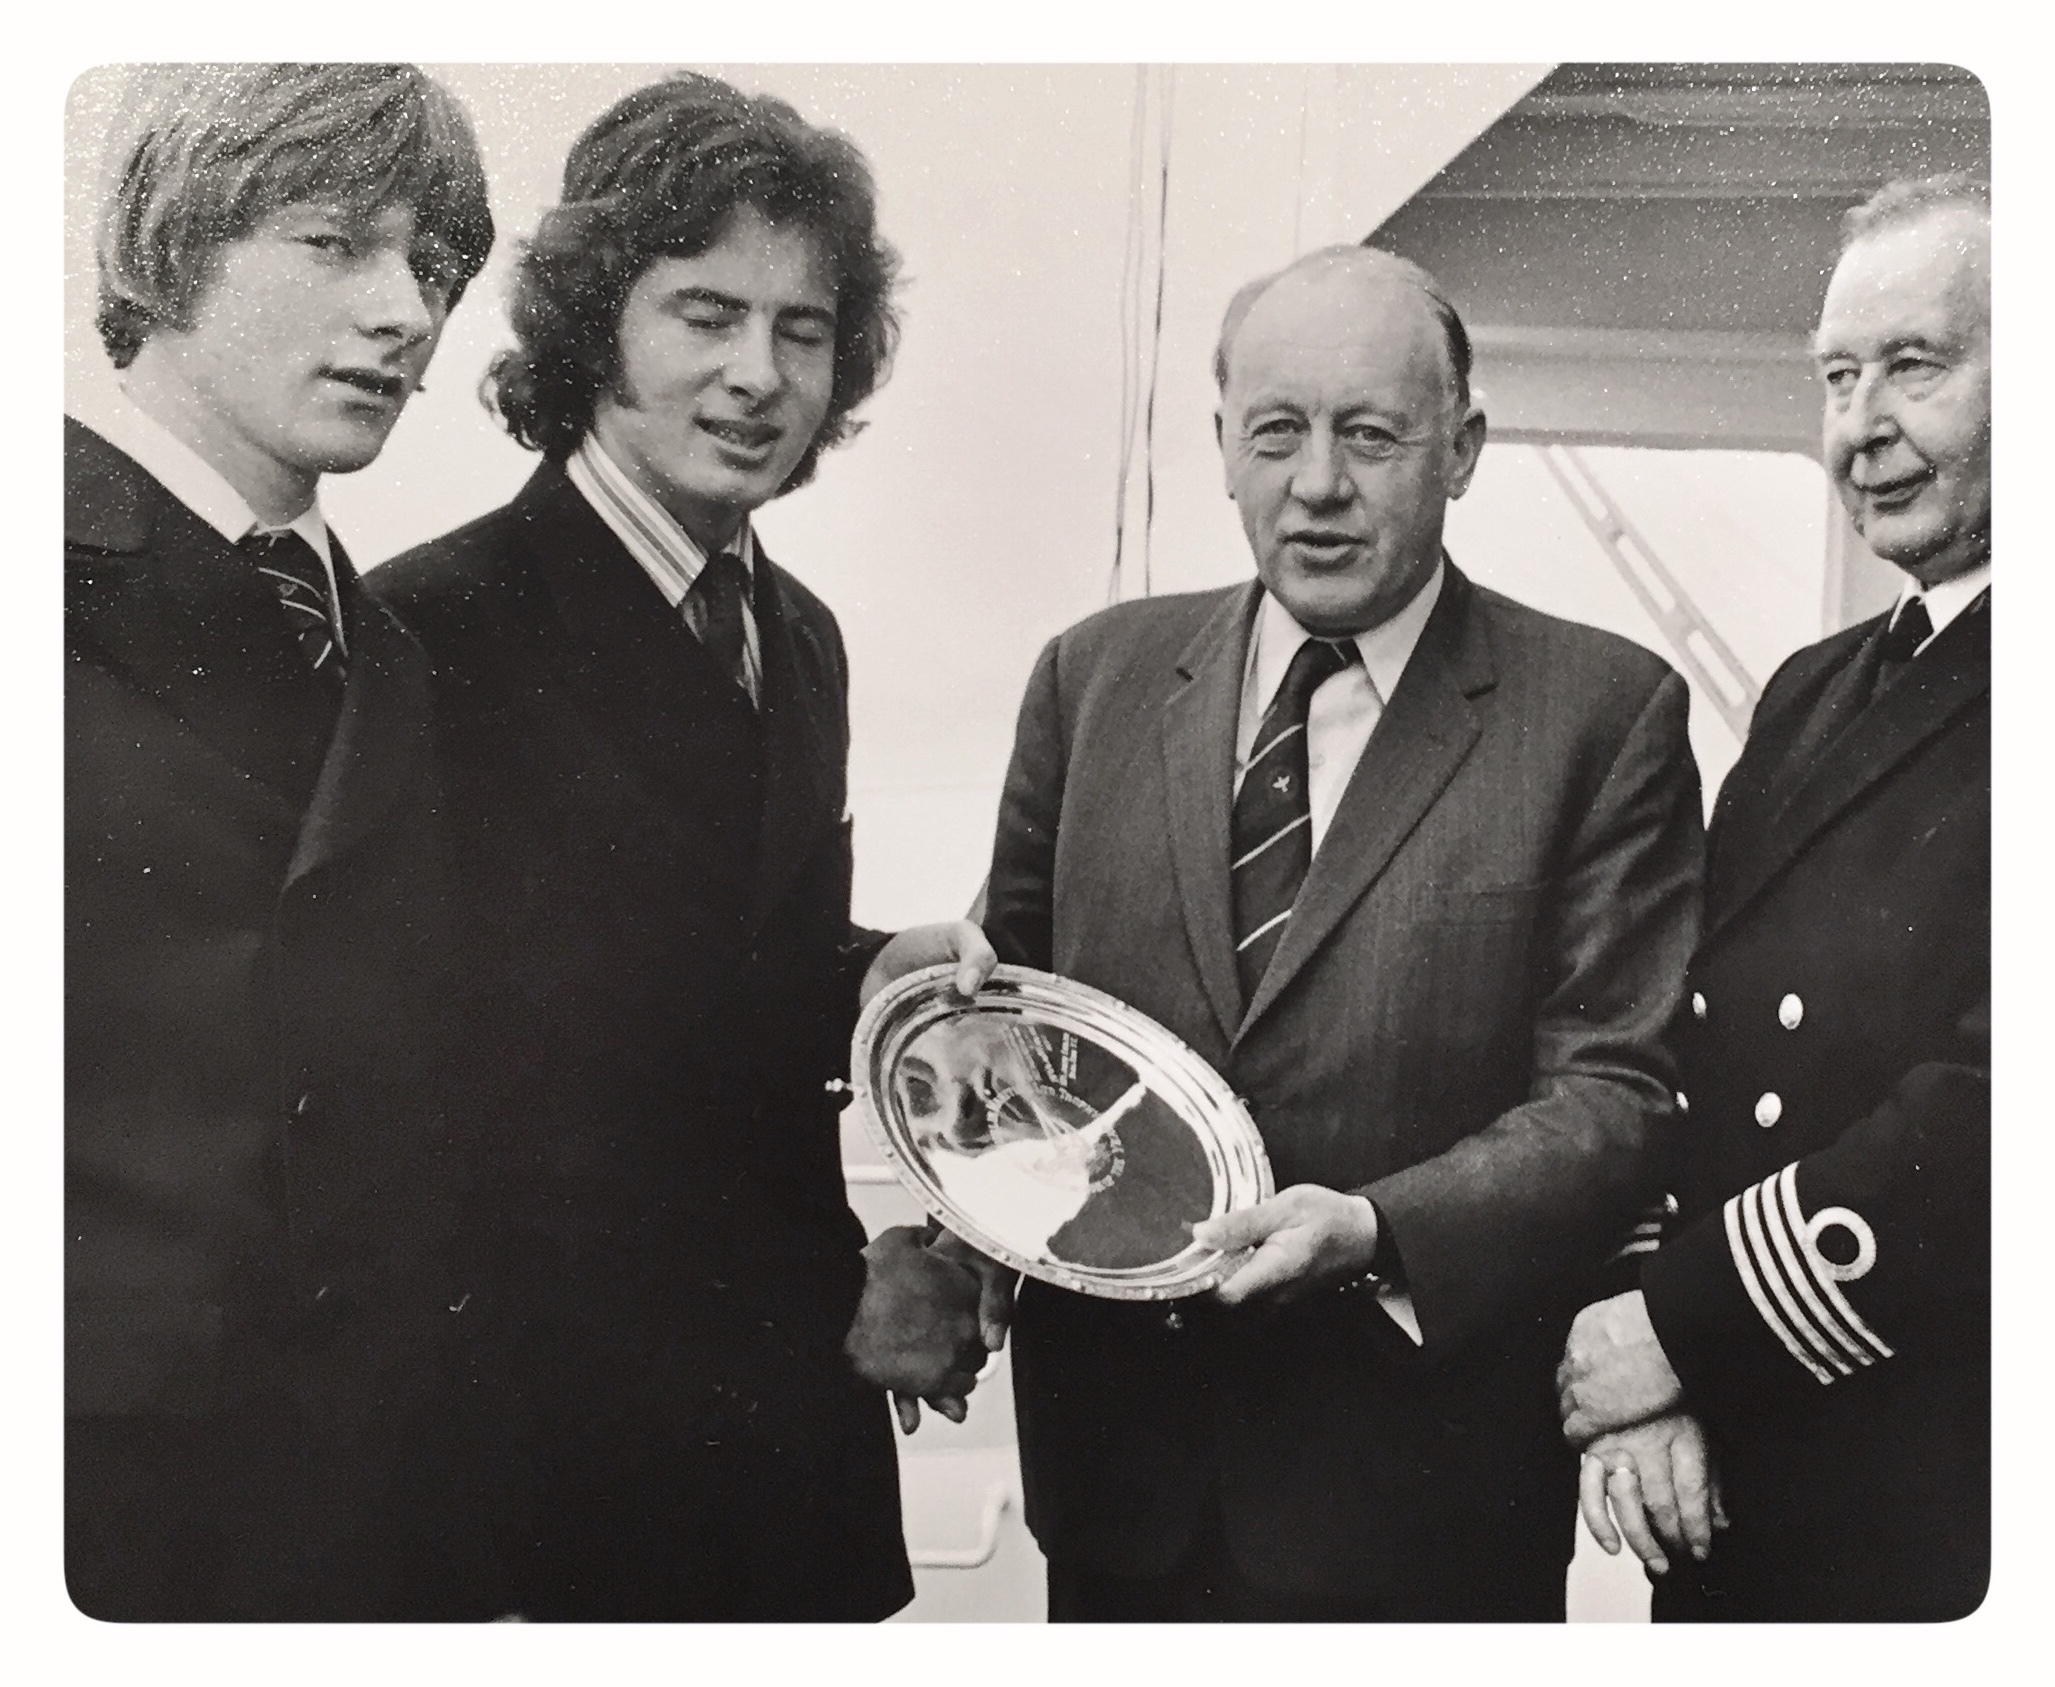 Patrick Jameson presentes Joe English with the ISA Junior Helmsman's Trophy in 1974 - Left to right: Nei Keneflick, Joe English, Patrick Jameson and the Captain of the RV Tyro, from which the trophy was presented each year in Dublin Port